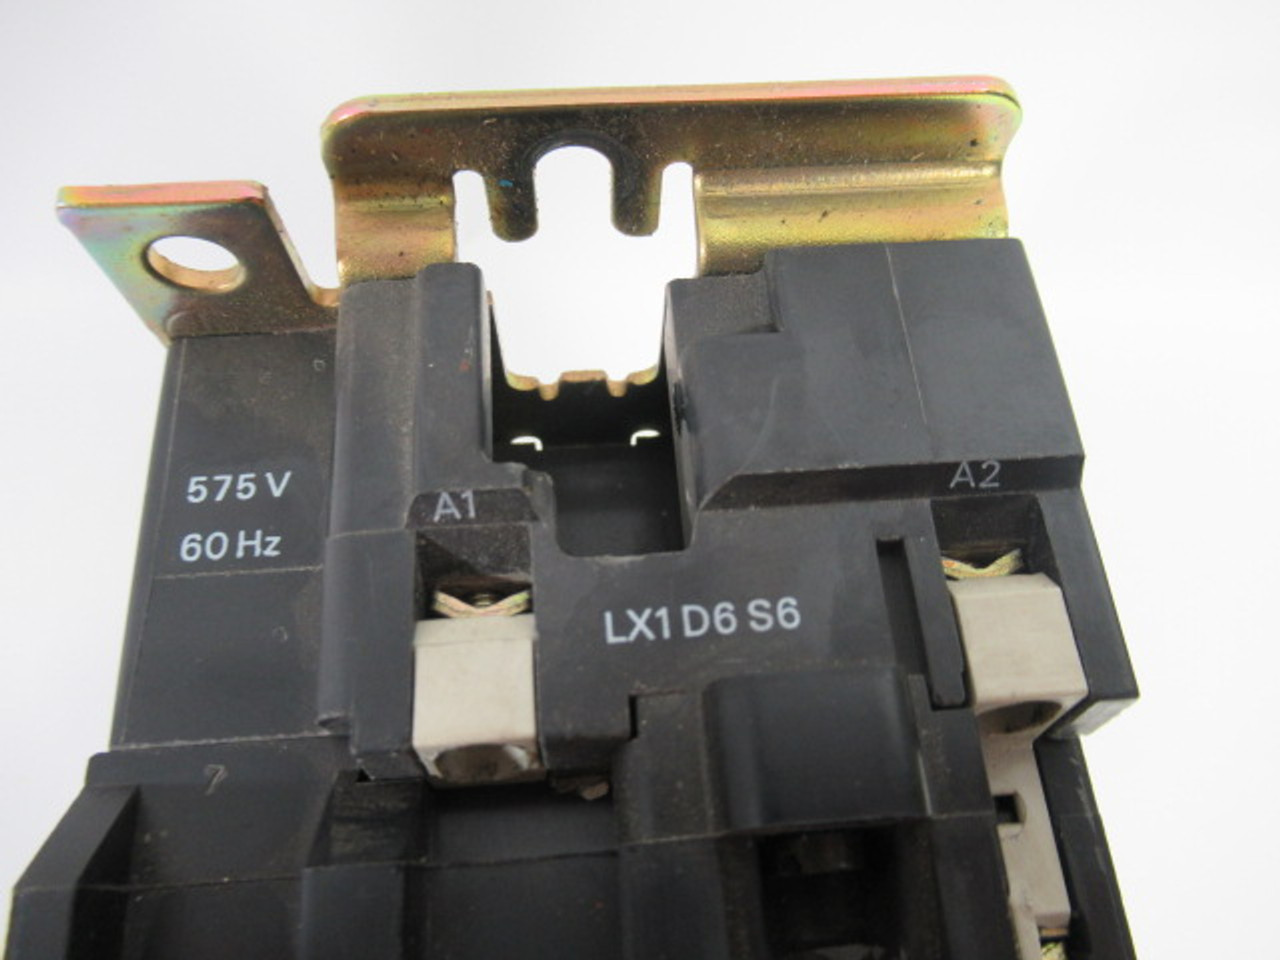 Telemecanique LC1-D5011-S6 Contactor 575V@60Hz 80A USED